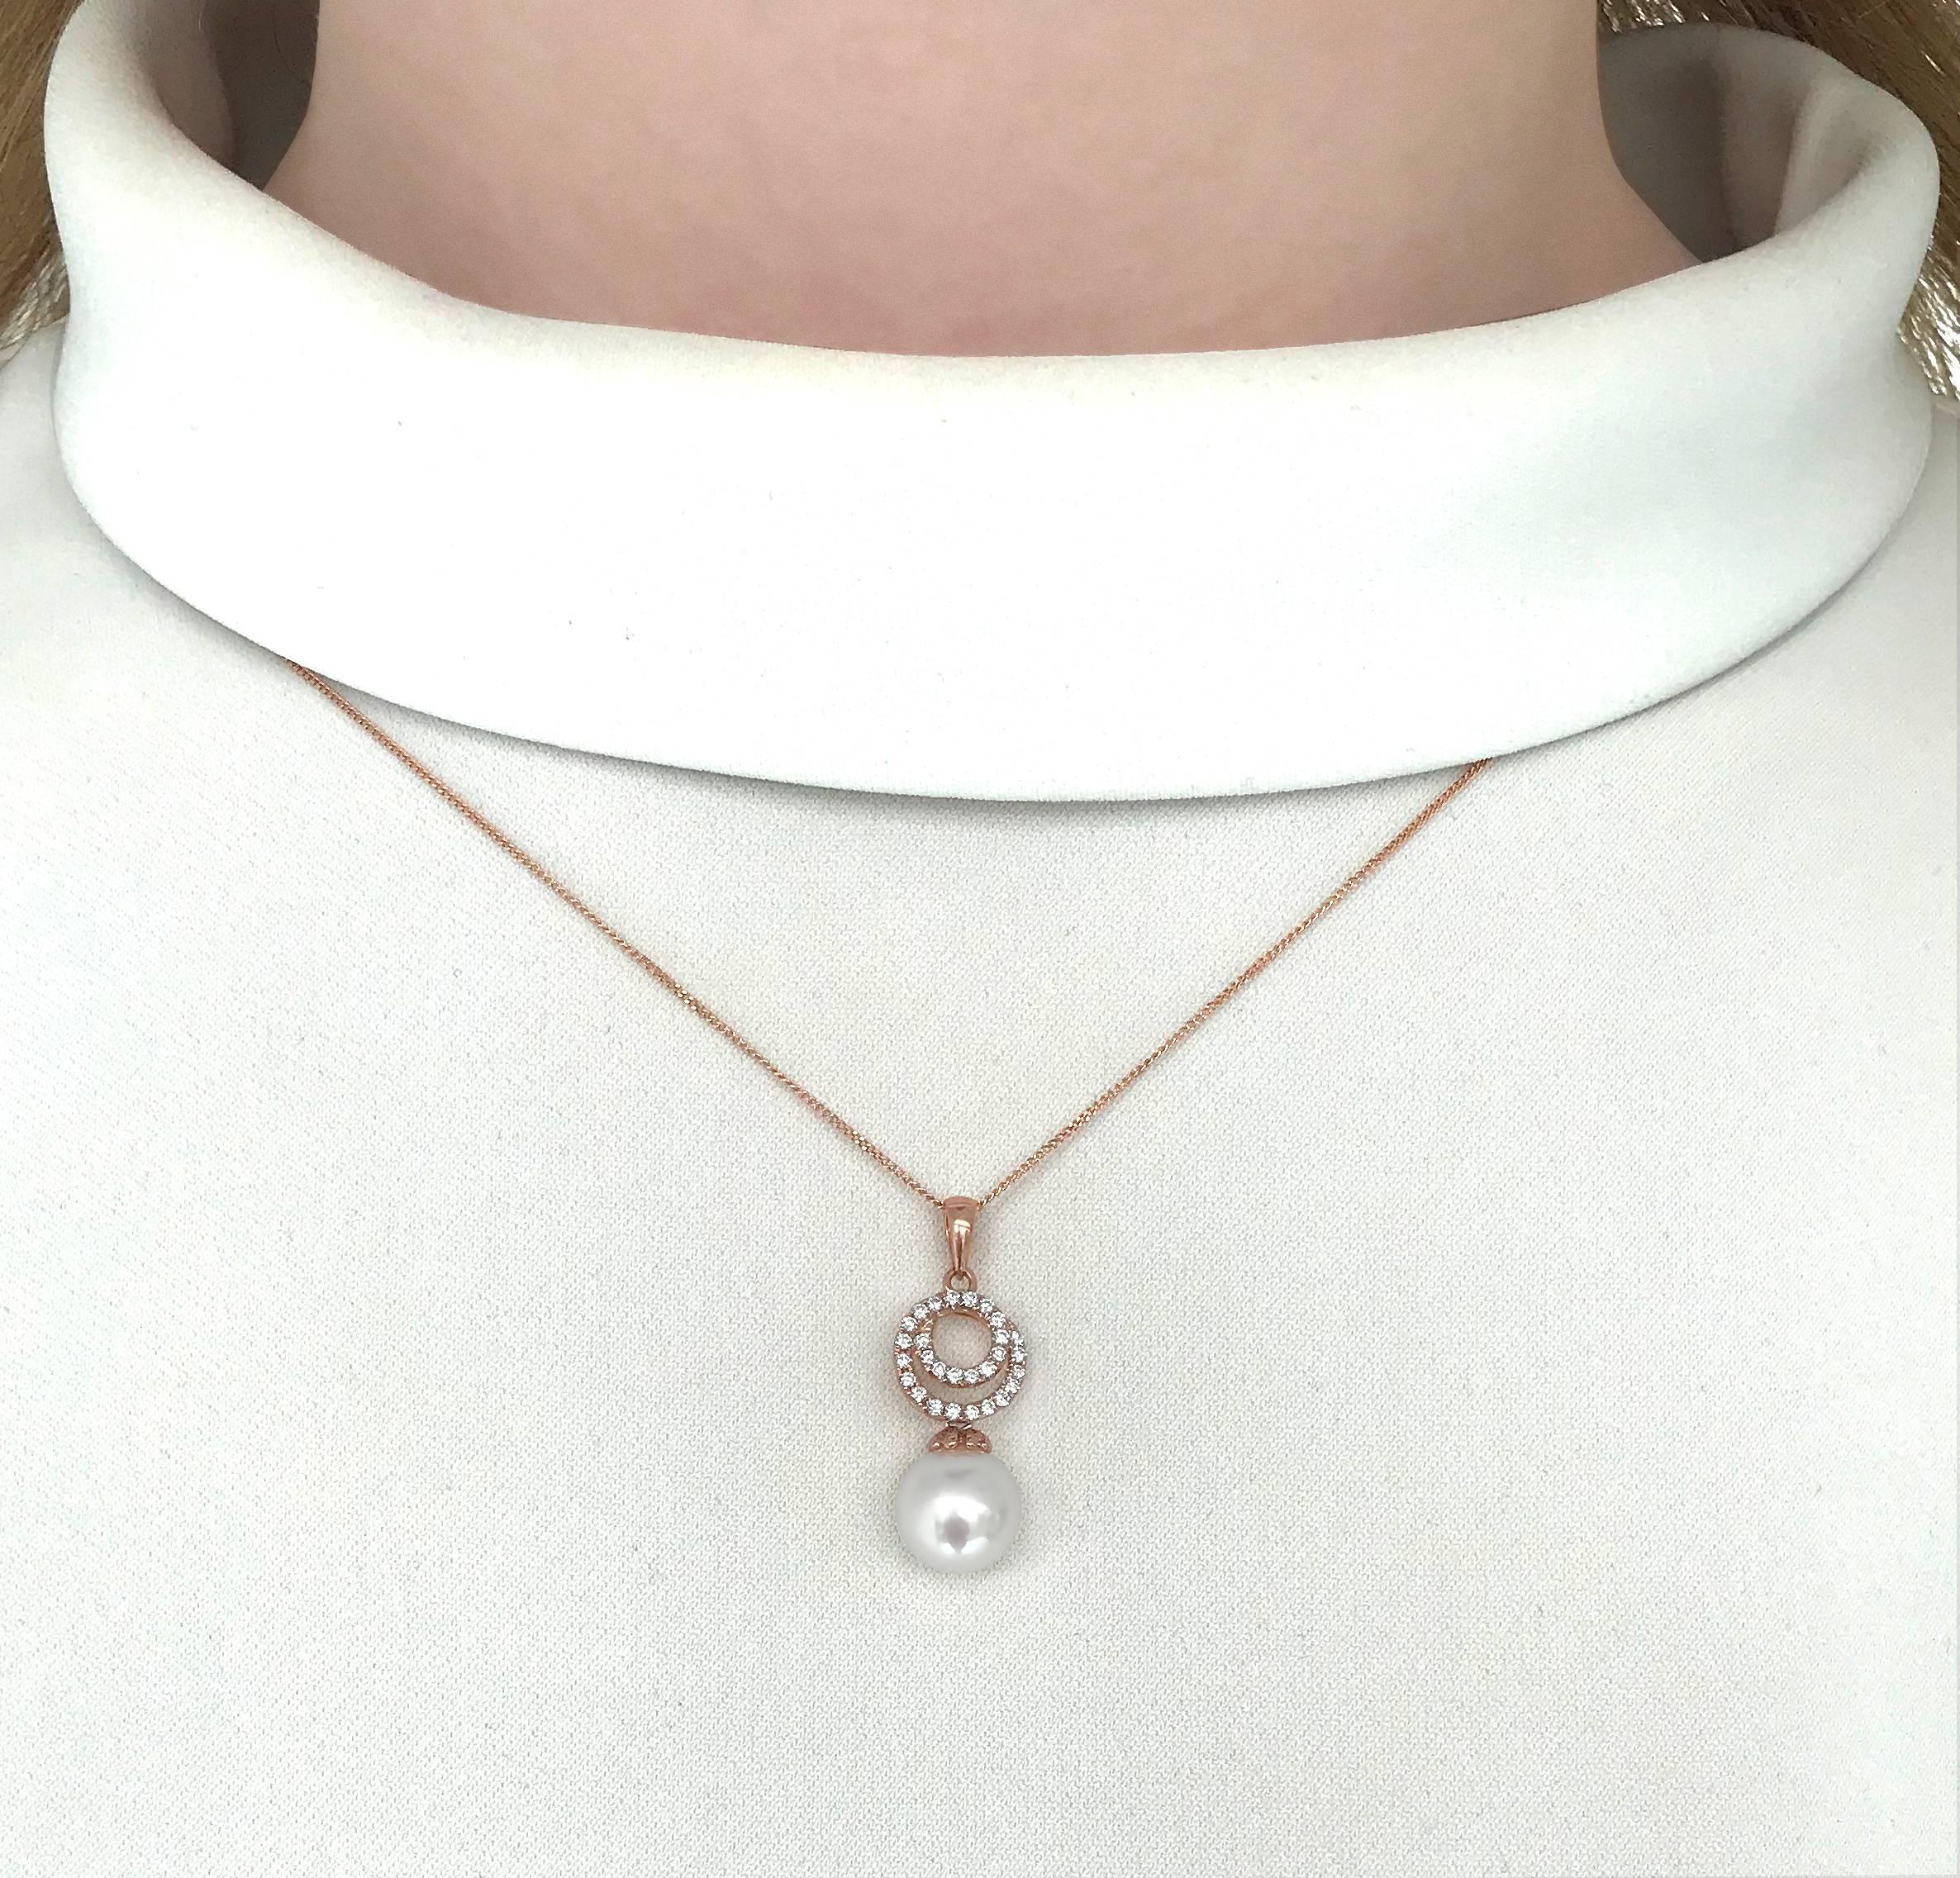 Dainty and sophisticated, this Yoko London pendant features a lustrous Japanese Akoya pearl set below a pretty halo of white diamonds. 

This pendant is the perfect accessory to add a touch of glamour to any outfit, and easy to transition from a day